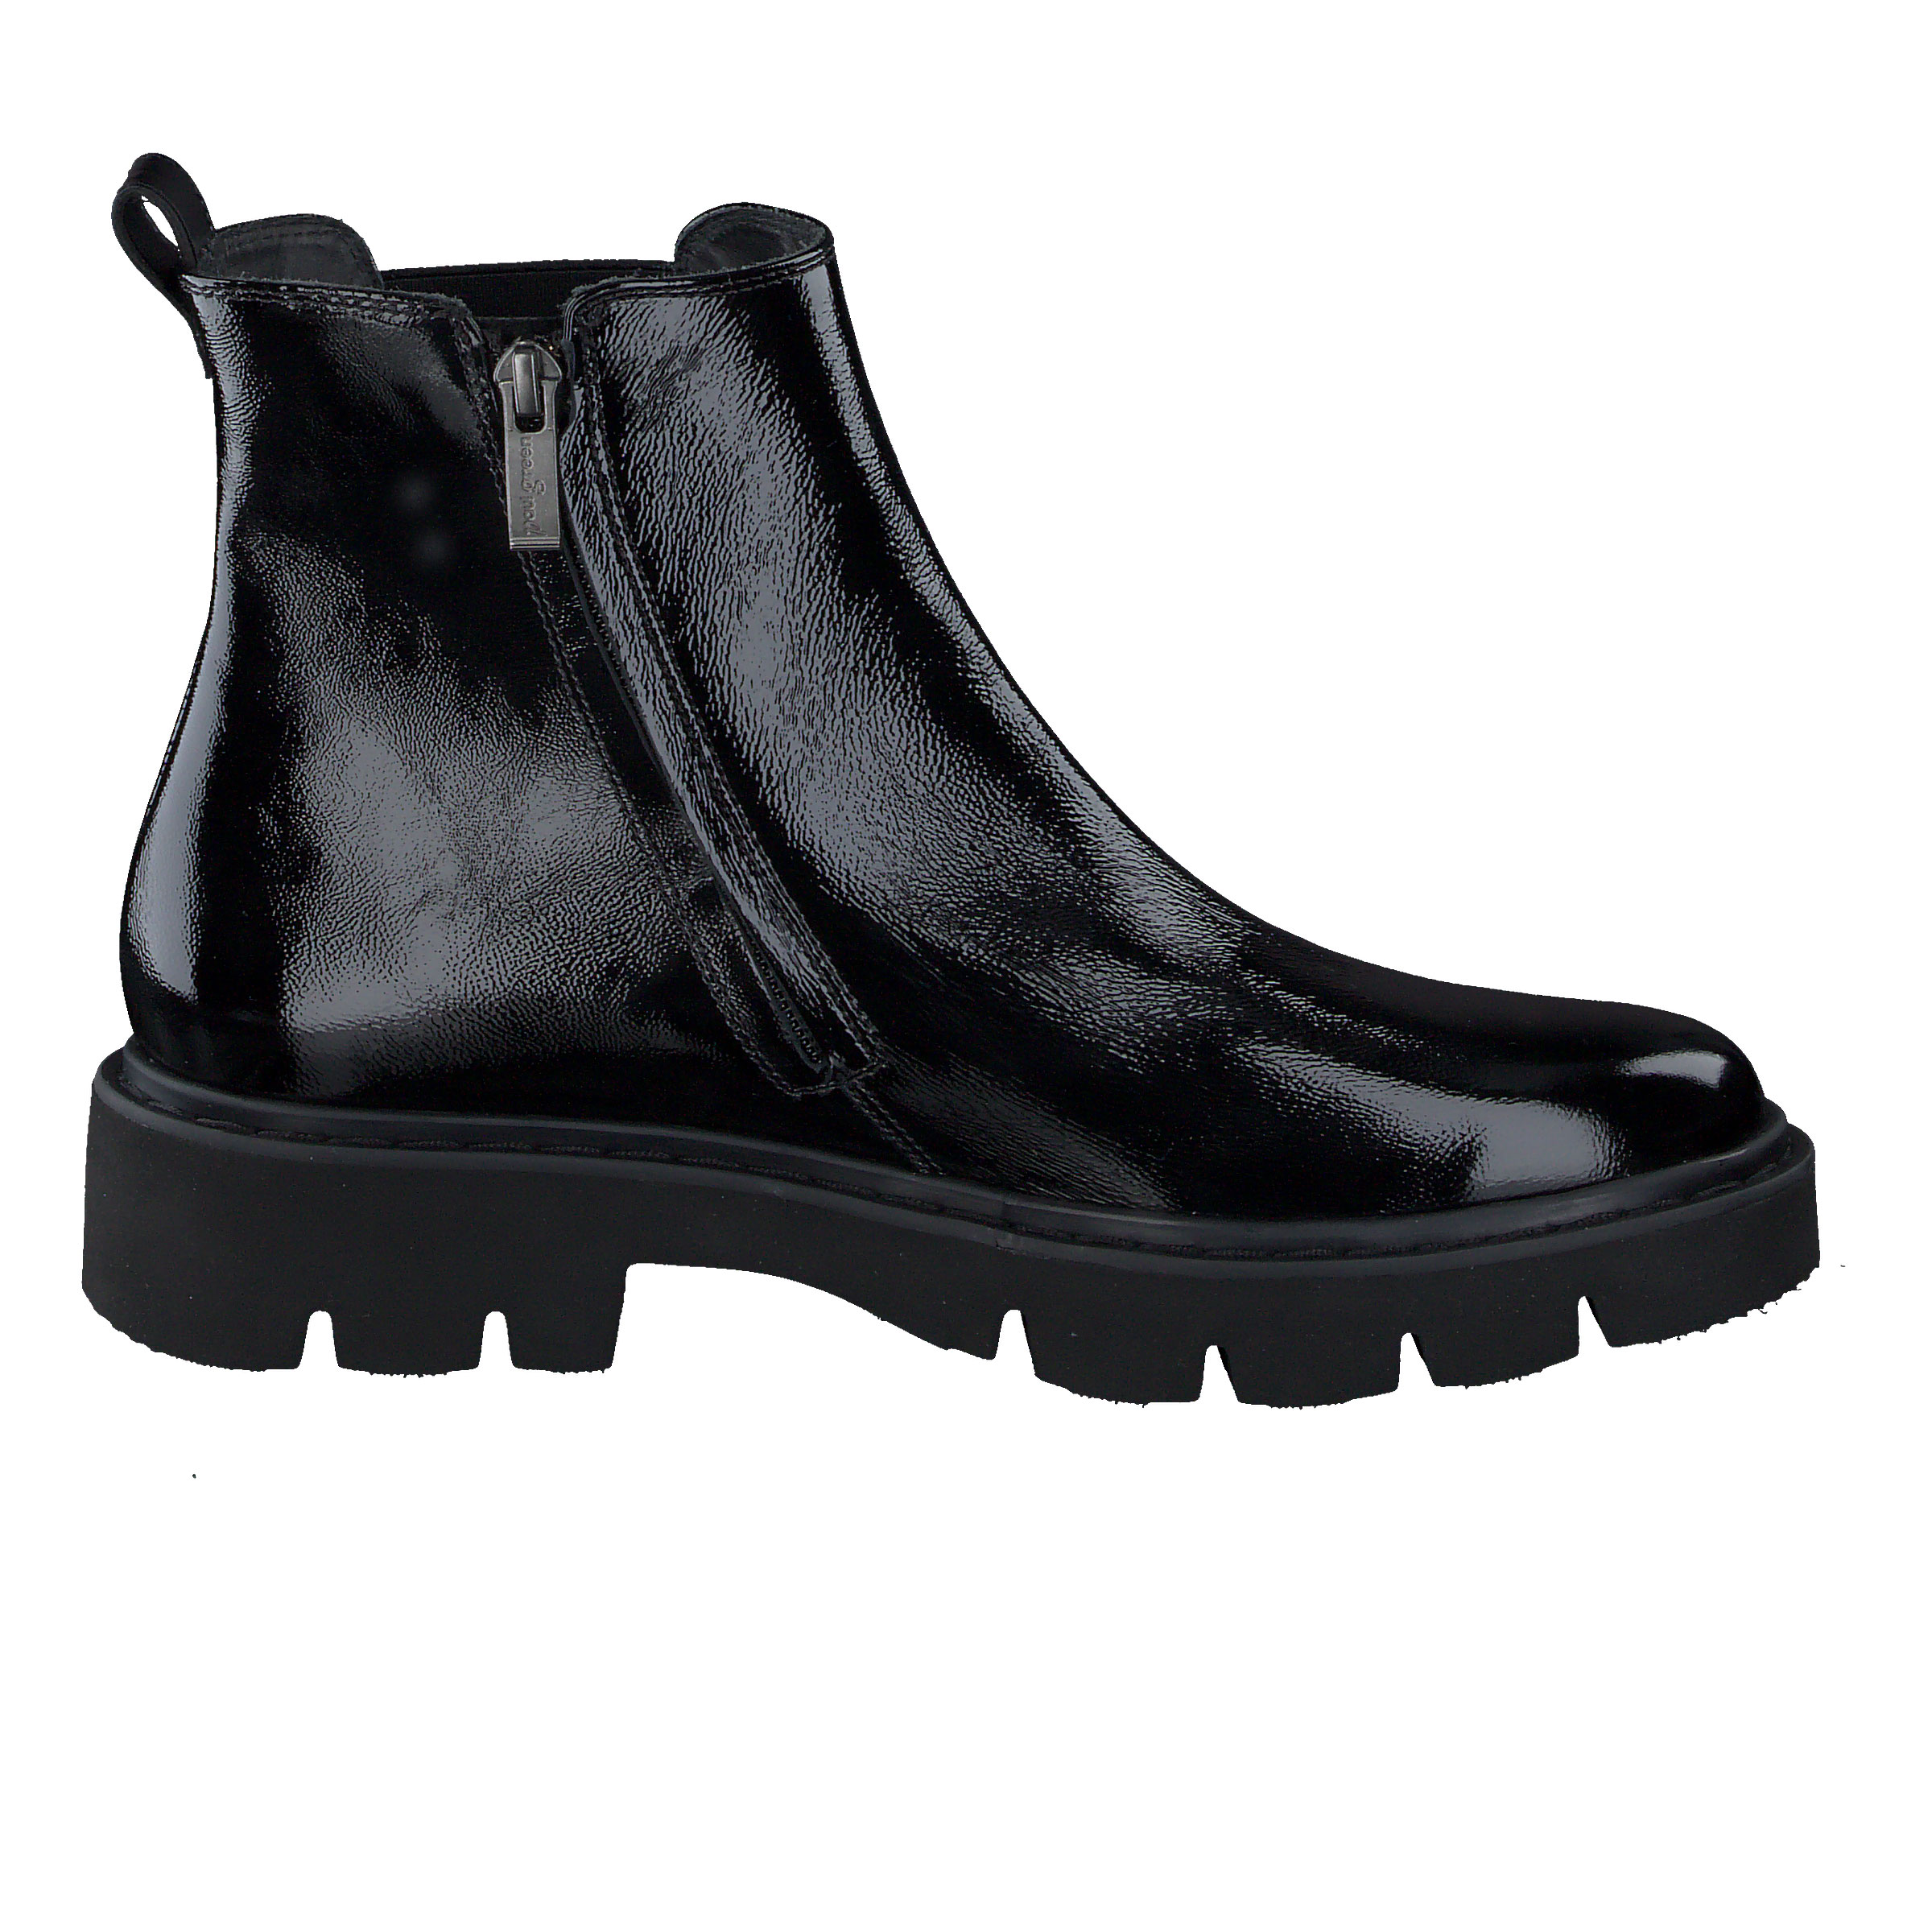 Chelsea Boot - Black smooth leather